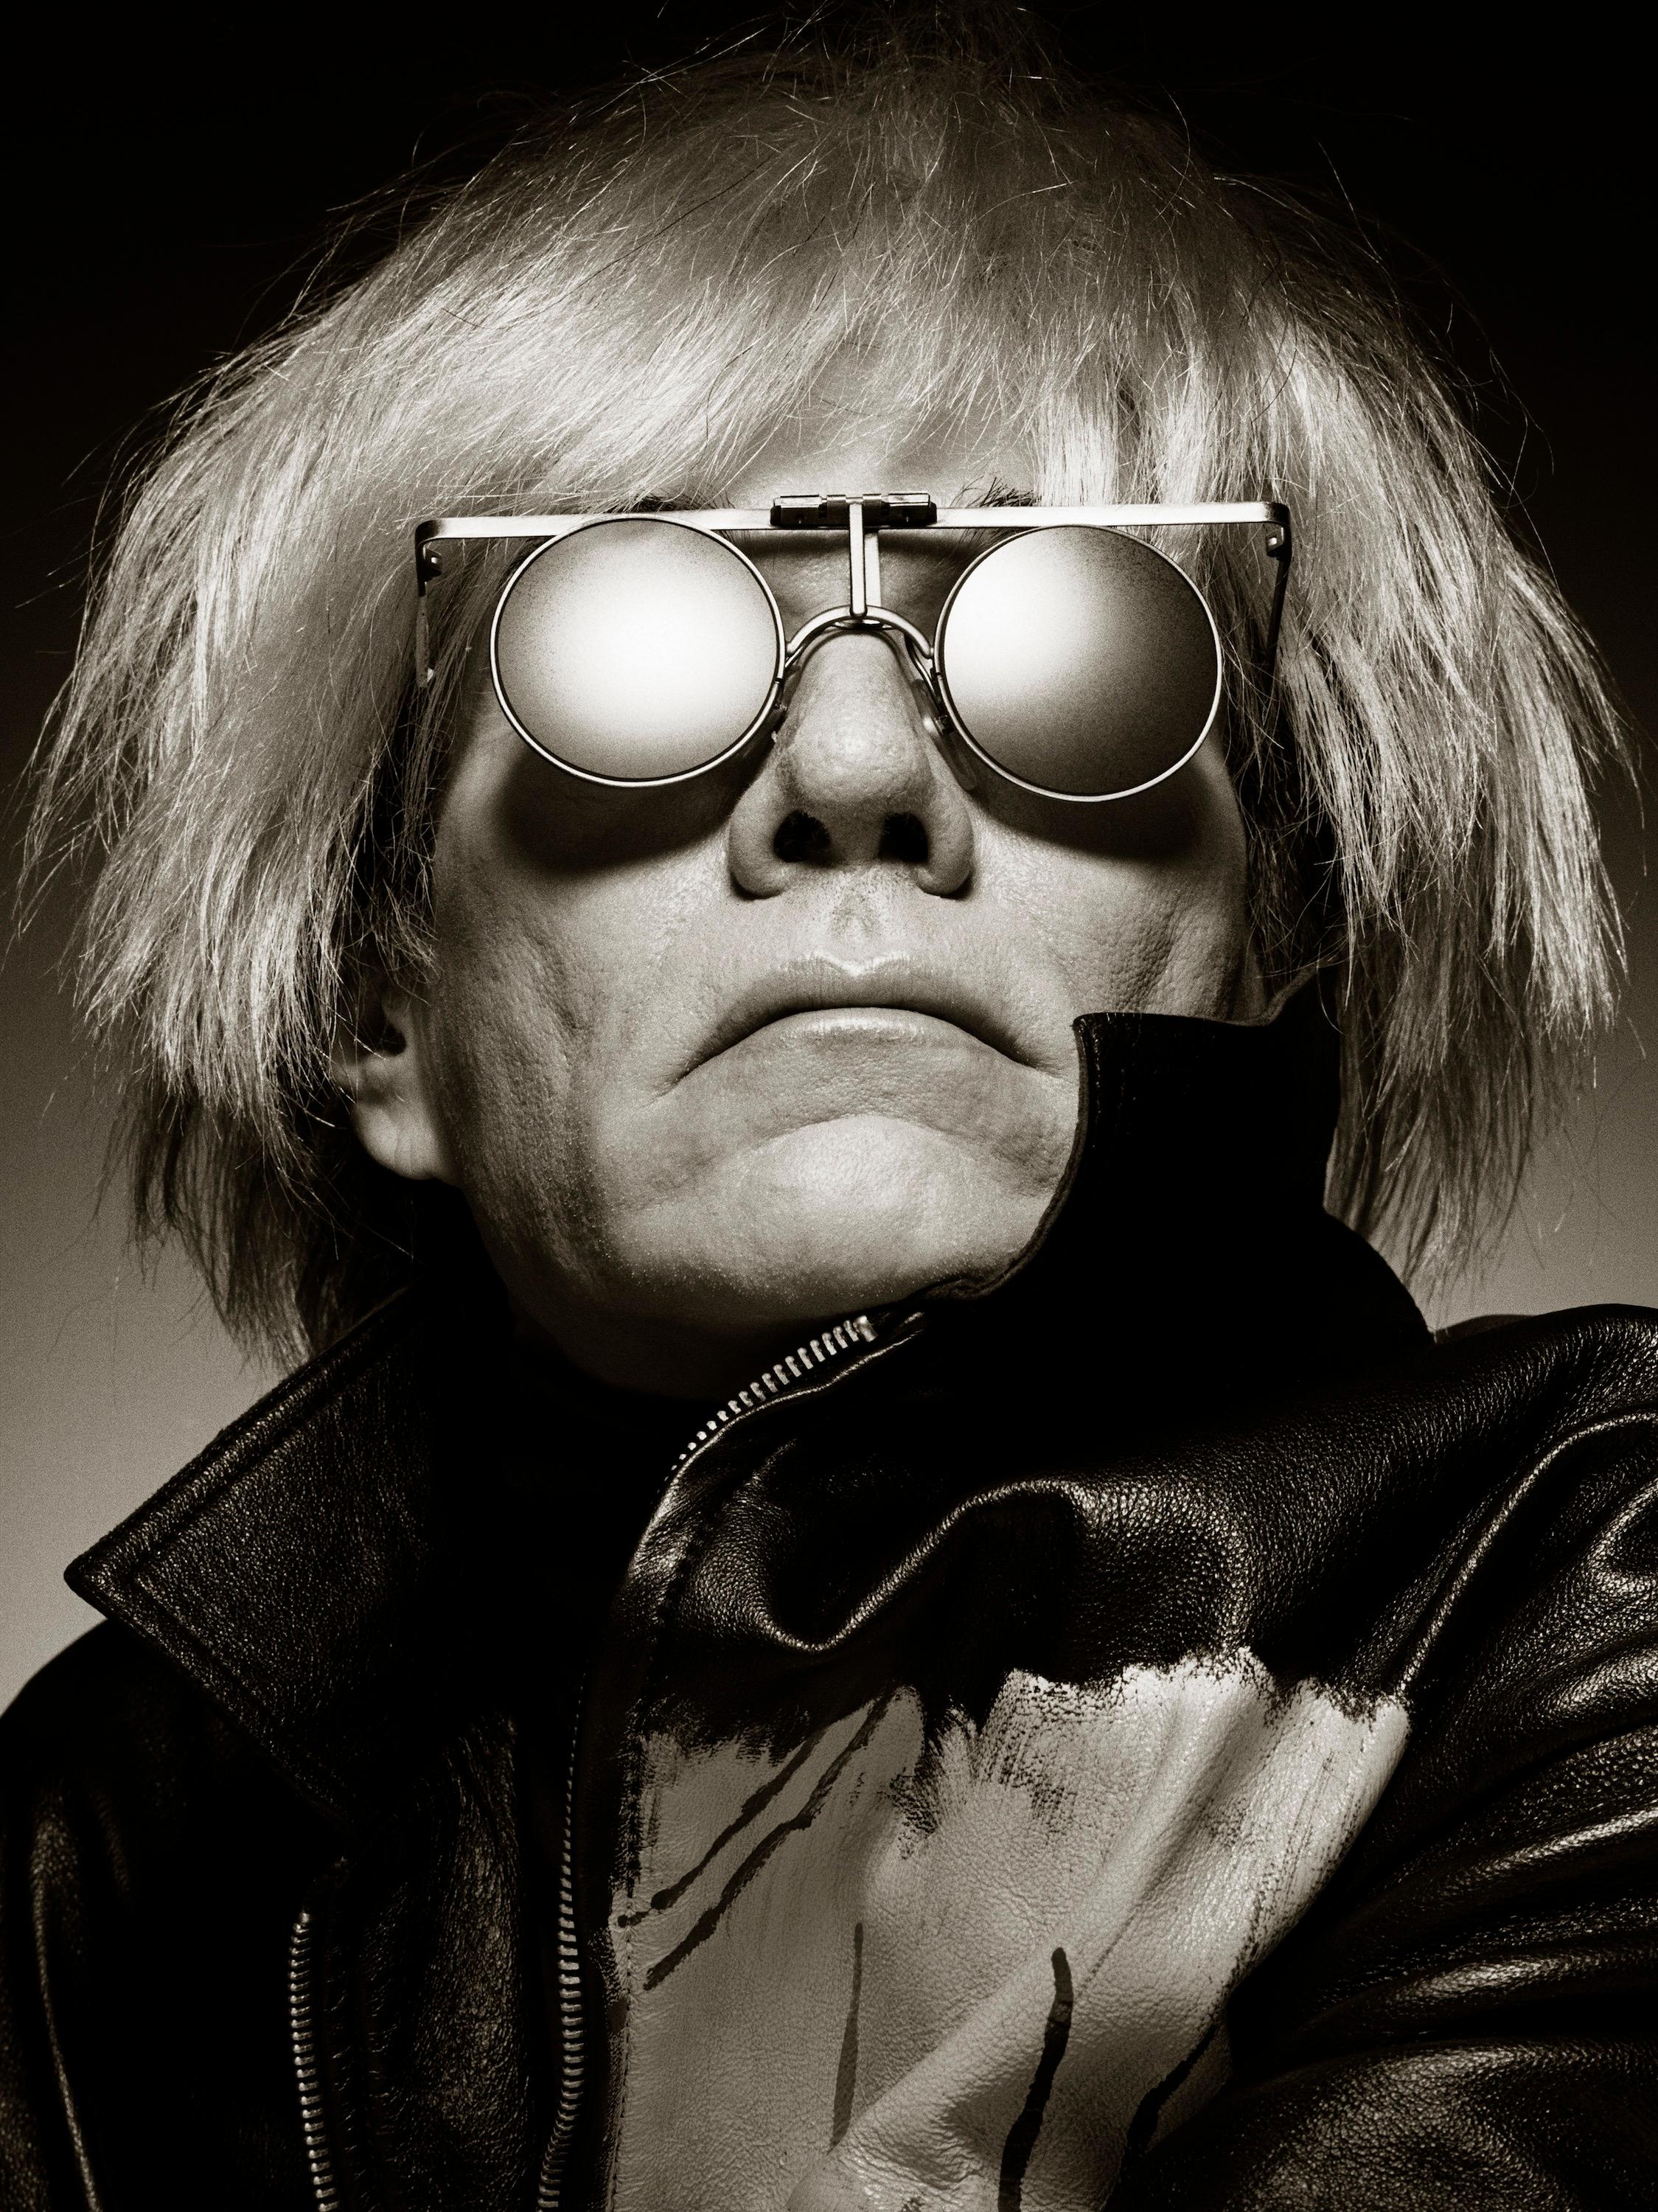 Extremely rare and highly coveted I'dentity frame. The iconic model worn by Andy Warhol and photographed by the great Albert Watson in the cover of Manner Vogue in June 1987, designed specially for the pop artist in 1986 only six pieces were made.